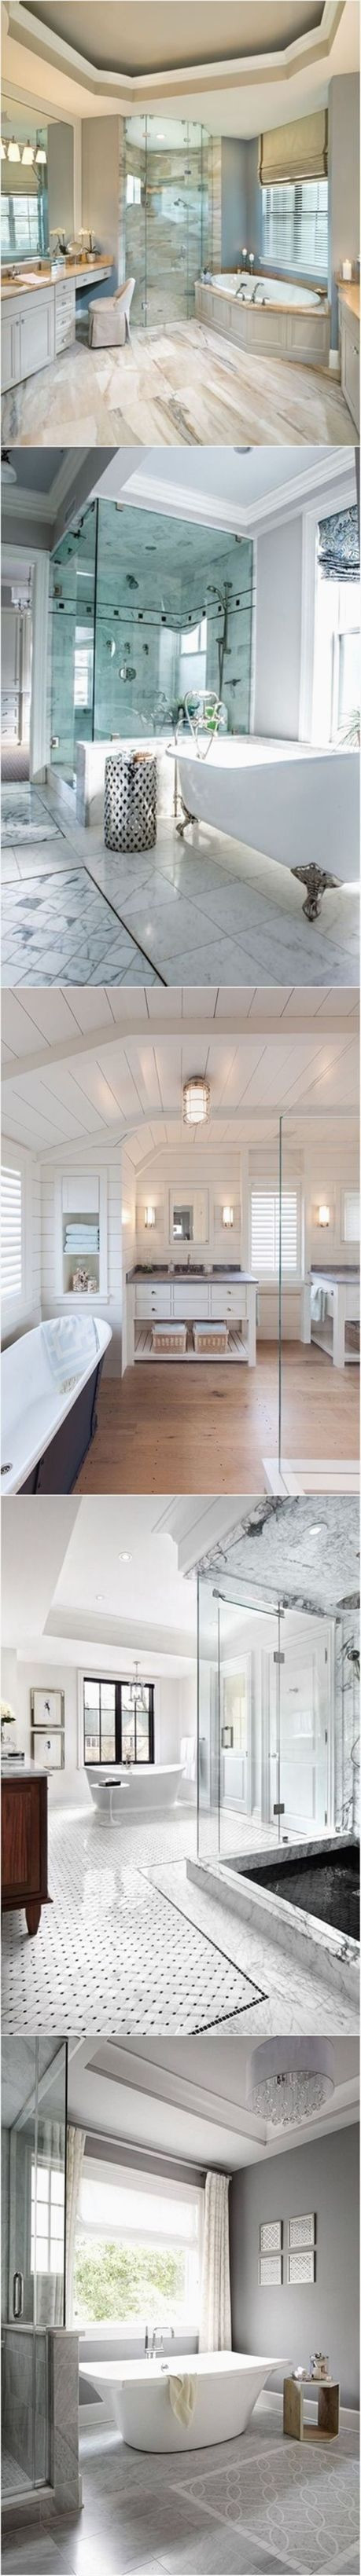 19 Fabulous Arizona Hardwood Floor Supply Inc Gilbert Az 2023 free download arizona hardwood floor supply inc gilbert az of 58 best ideas for a beach cottage images on pinterest bathroom with new small kitchen cost